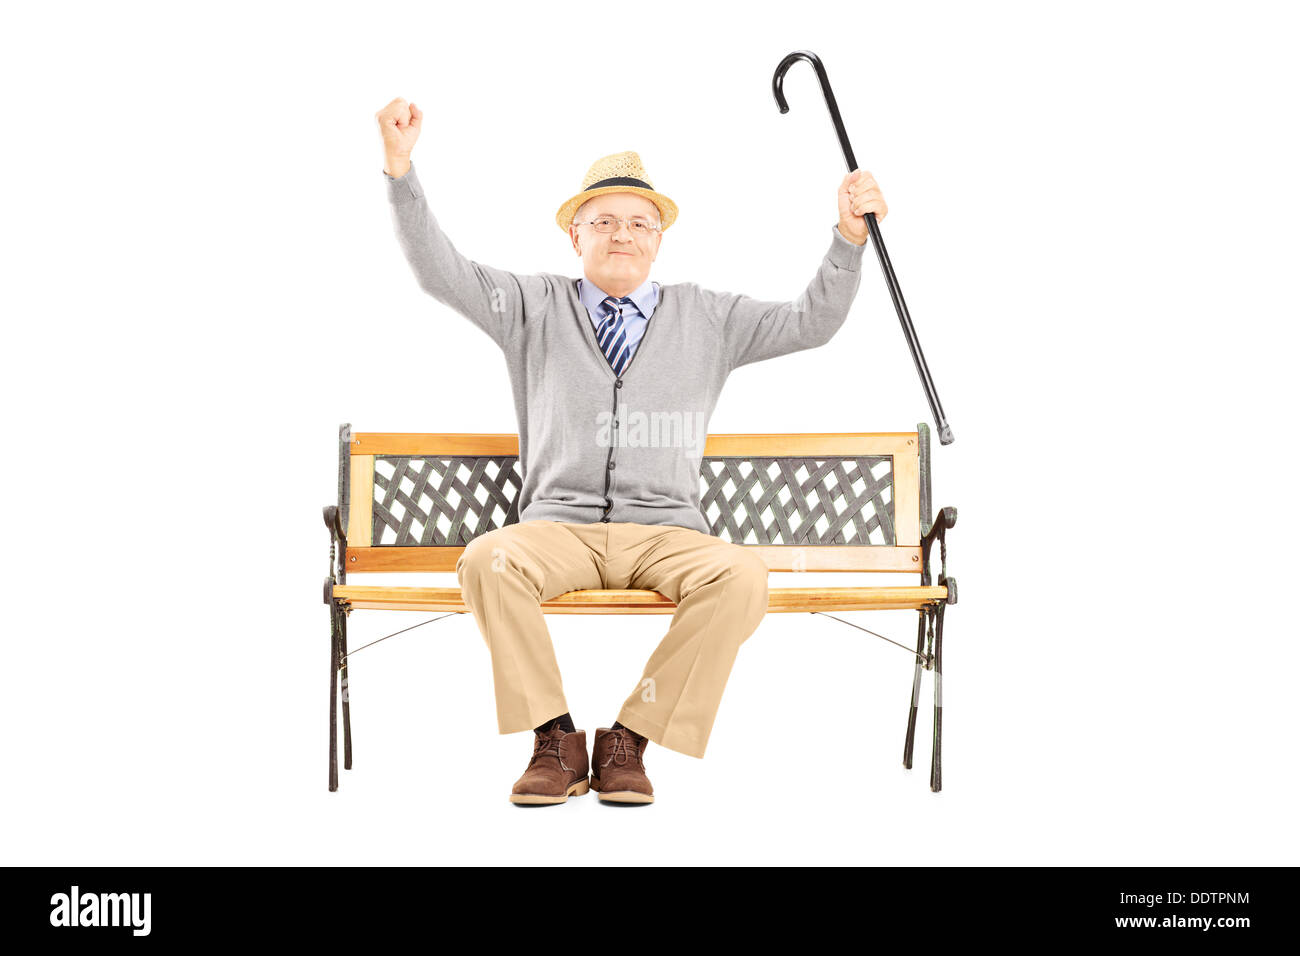 Senior happy man sitting on a wooden bench and gesturing happiness Stock Photo